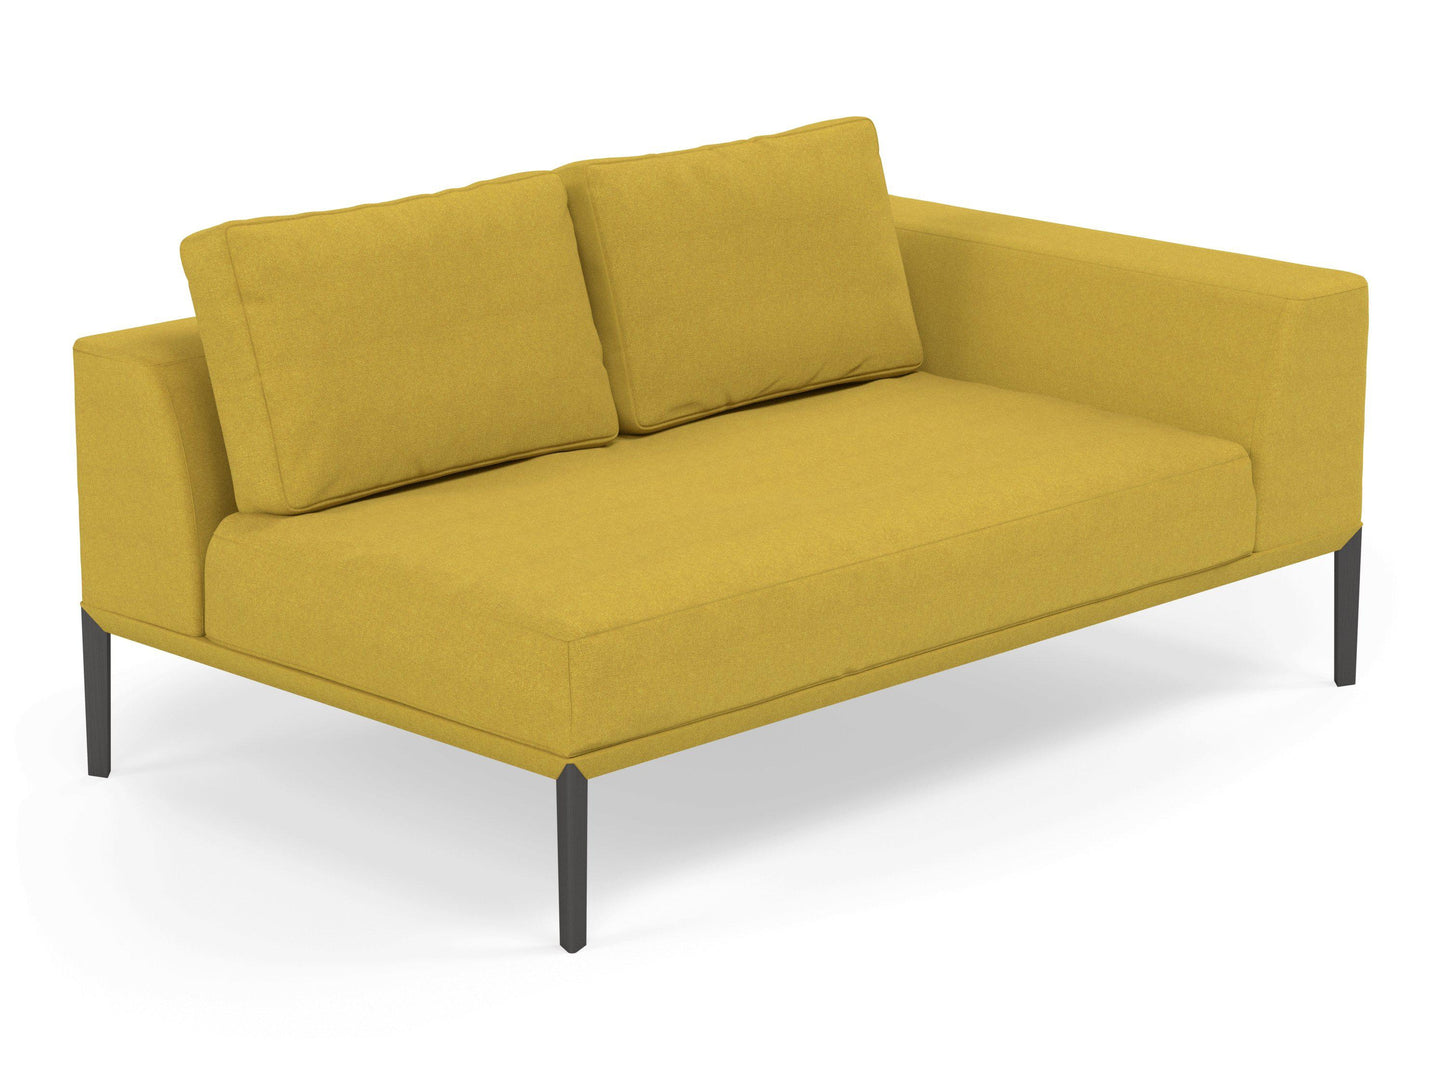 Modern 2 Seater Chaise Lounge Style Sofa with Left Armrest in Vibrant Mustard Yellow Fabric-Distinct Designs (London) Ltd